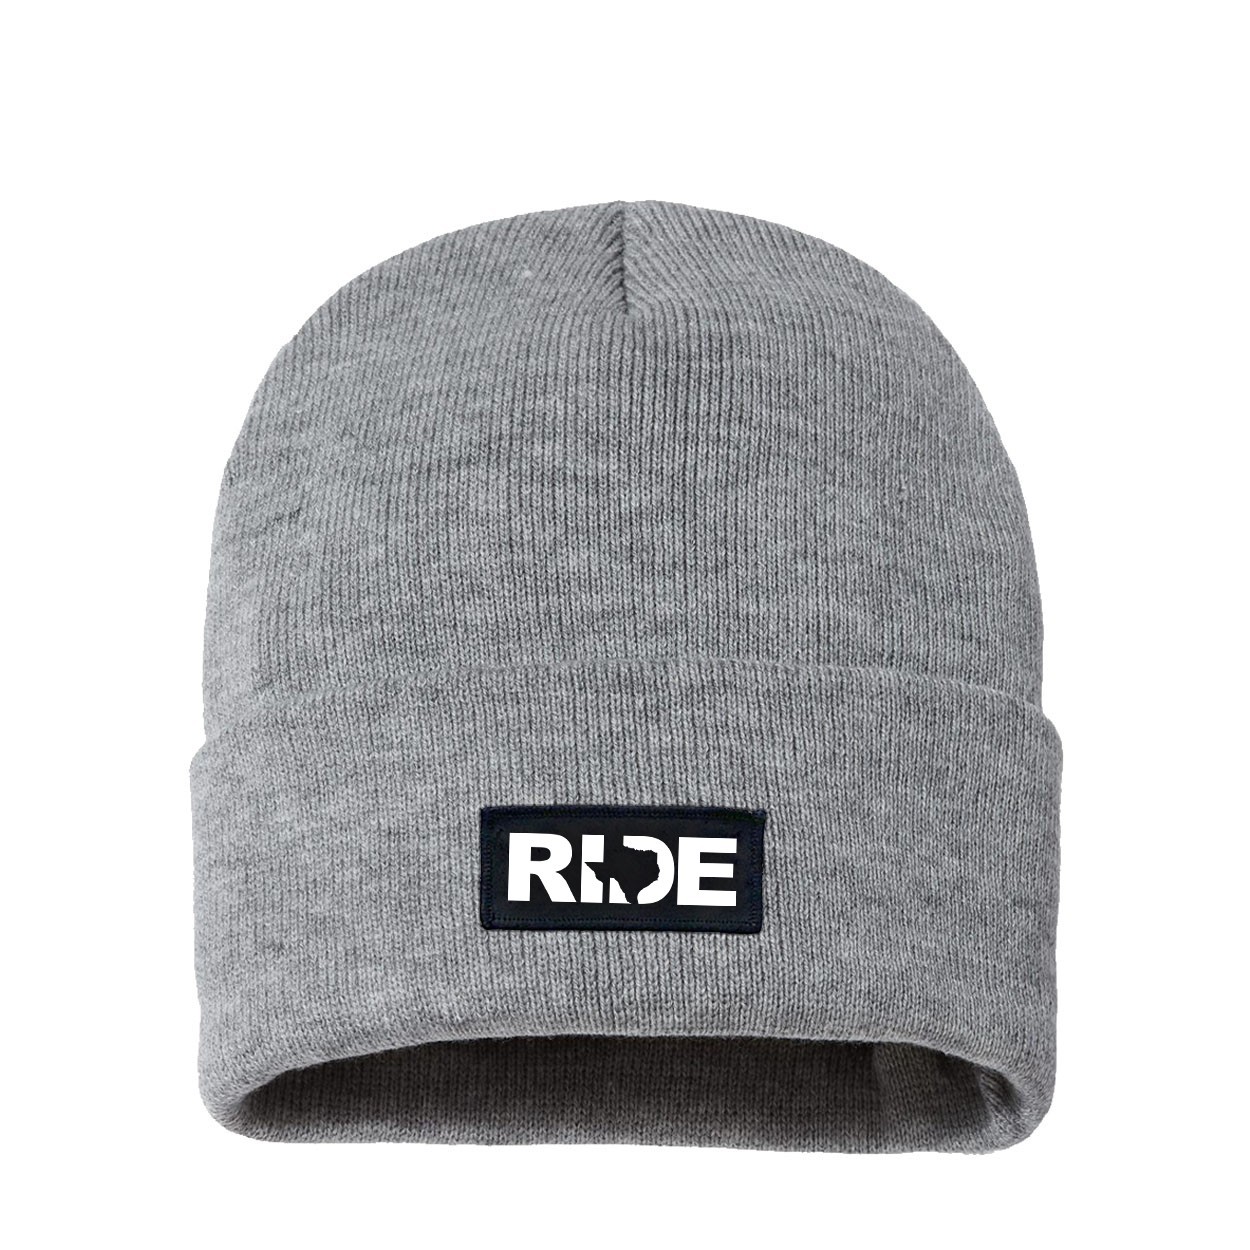 Ride Texas Night Out Woven Patch Night Out Sherpa Lined Cuffed Beanie Heather Gray (White Logo)